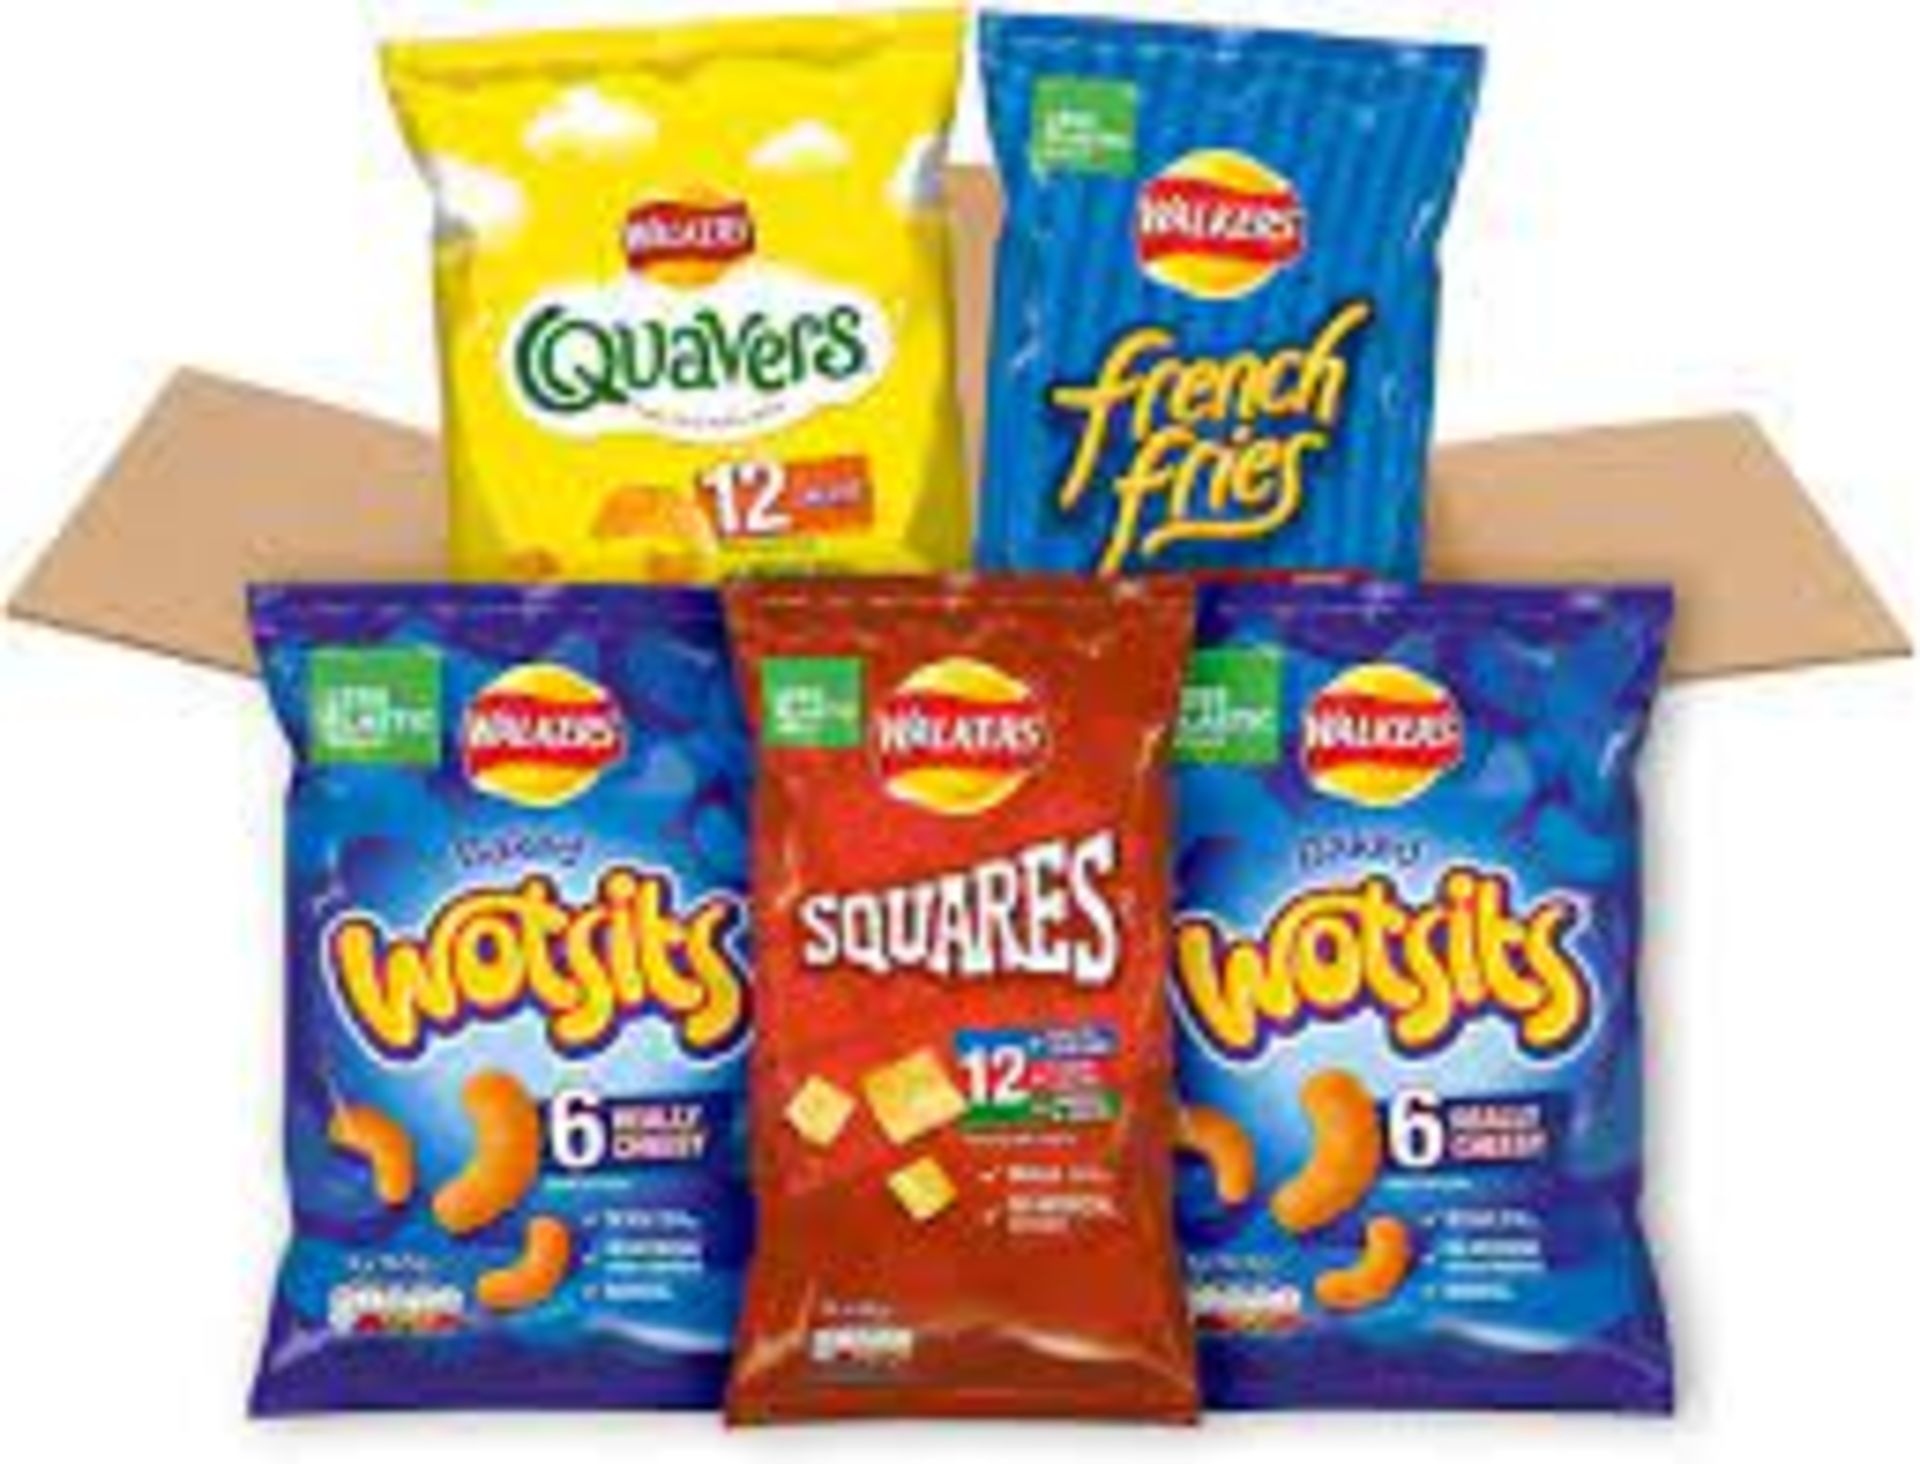 **RRP £570 (Approx. Count 41) spW48p1170h Walkers under 100 calories snacks box (Pack of 1) - BBE (